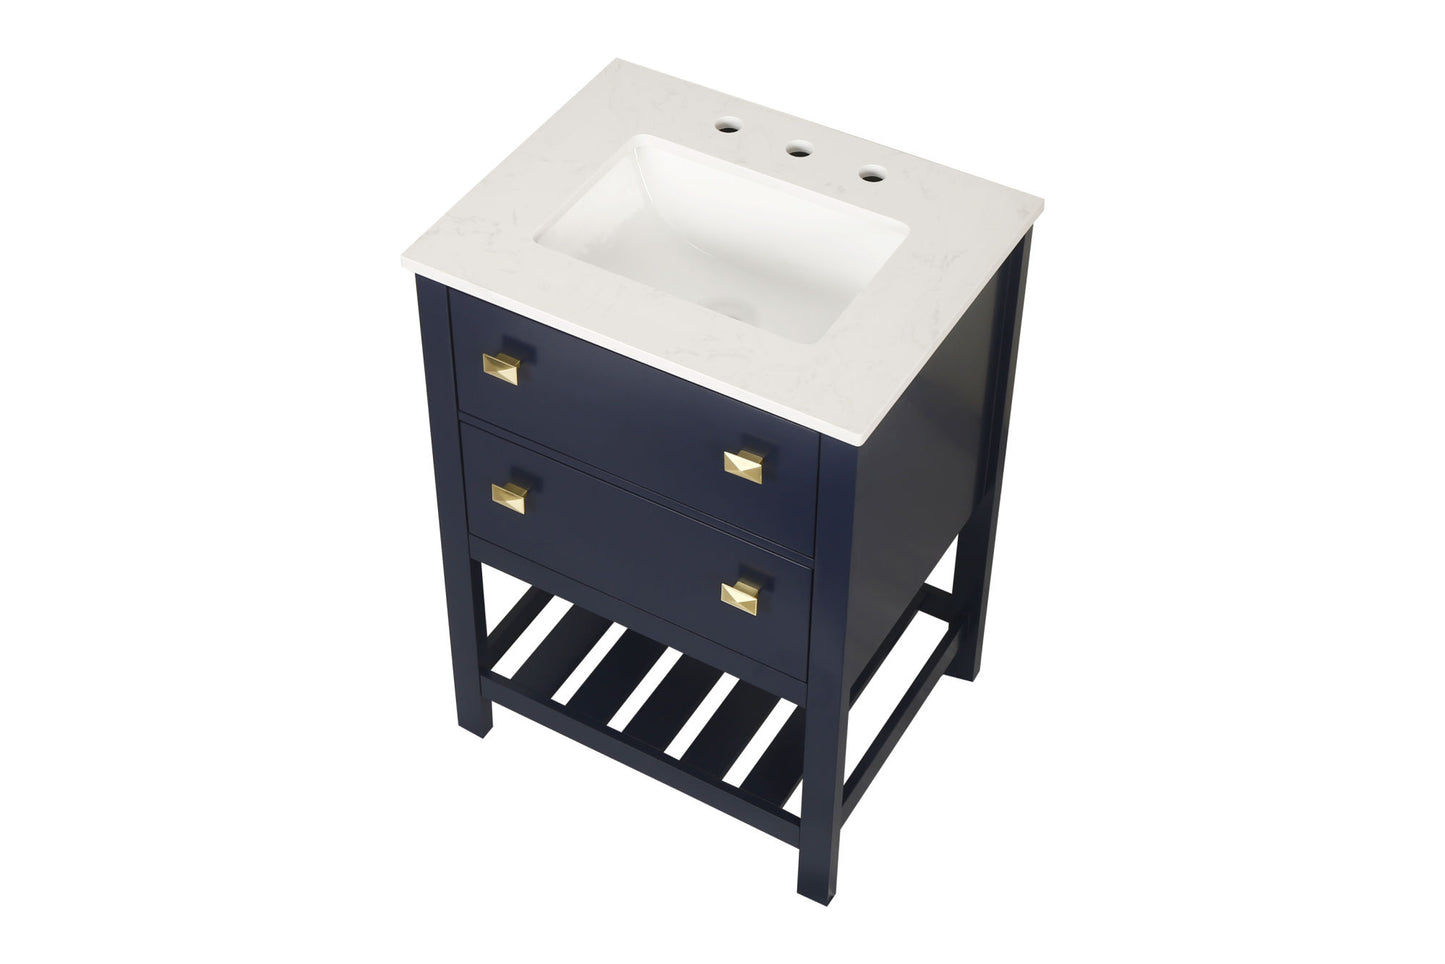 Vanity Sink Combo featuring a Marble Countertop, Bathroom Sink Cabinet, and Home Decor Bathroom Vanities - Fully Assembled Blue 24-inch Vanity with Sink 23V01-24NB